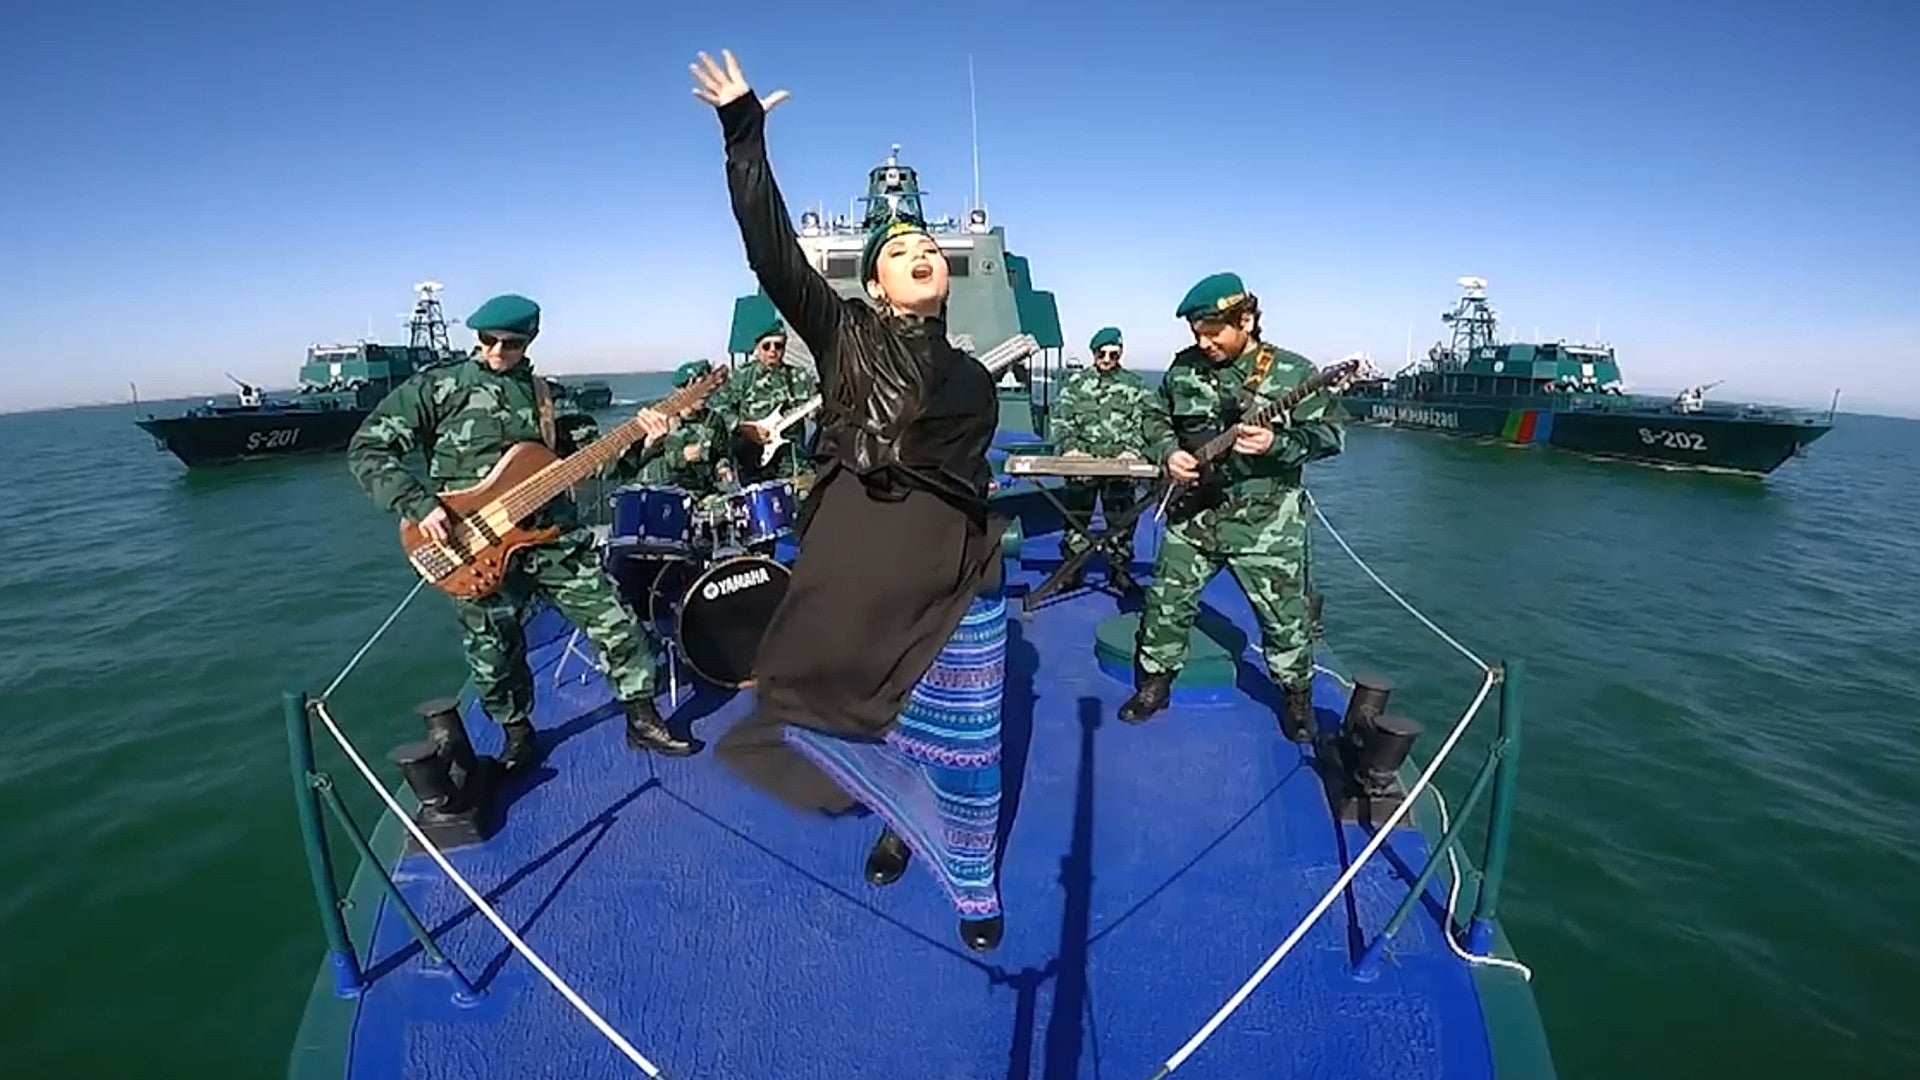 Azerbaijan’s Border Guard Has This Awesomely Bad Music Video With Tanks and Suicide Drones